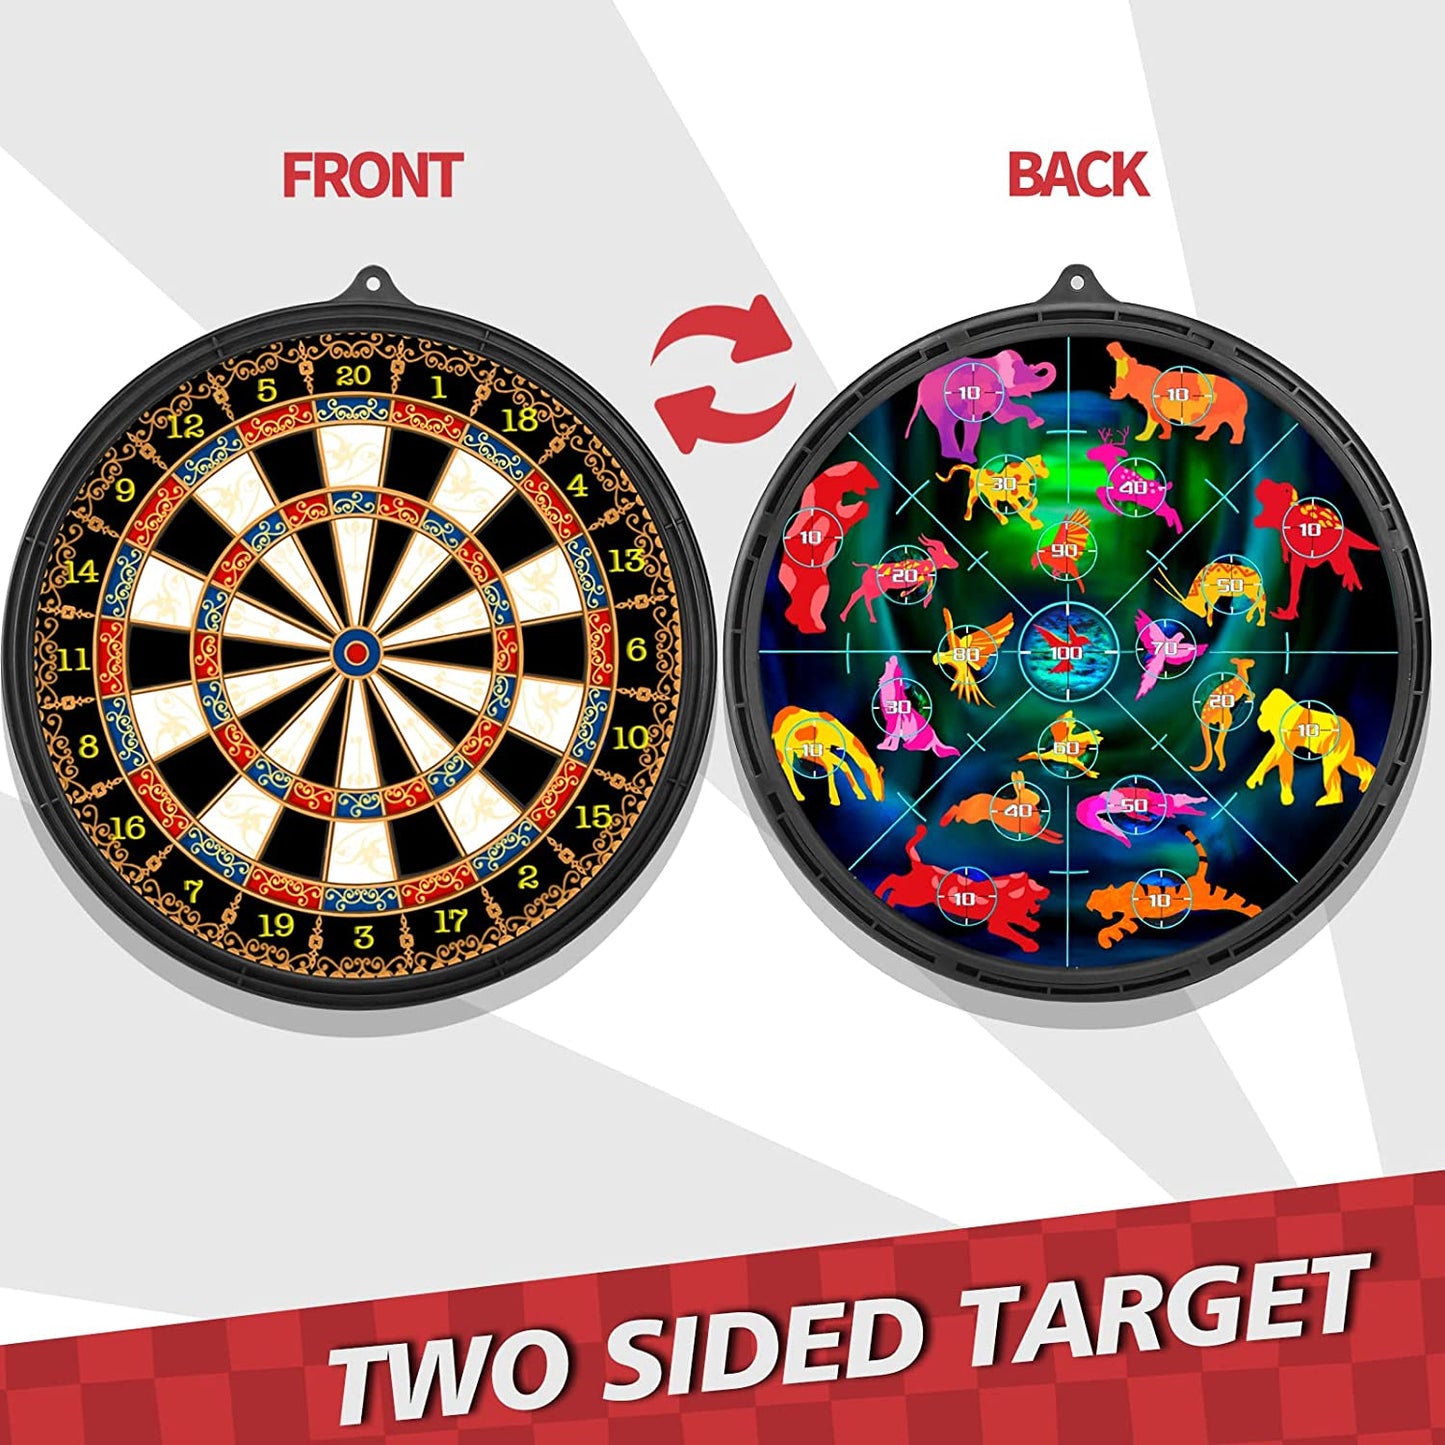 "Magnetic Dart Board - Double Side Magnetic board with 12 pcs Darts- Excellent Indoor Game and Party Games - Magnetic Dart Board Toys Gifts for 5 6 7 8 9 10 11 12 Year Old Boy Kids "